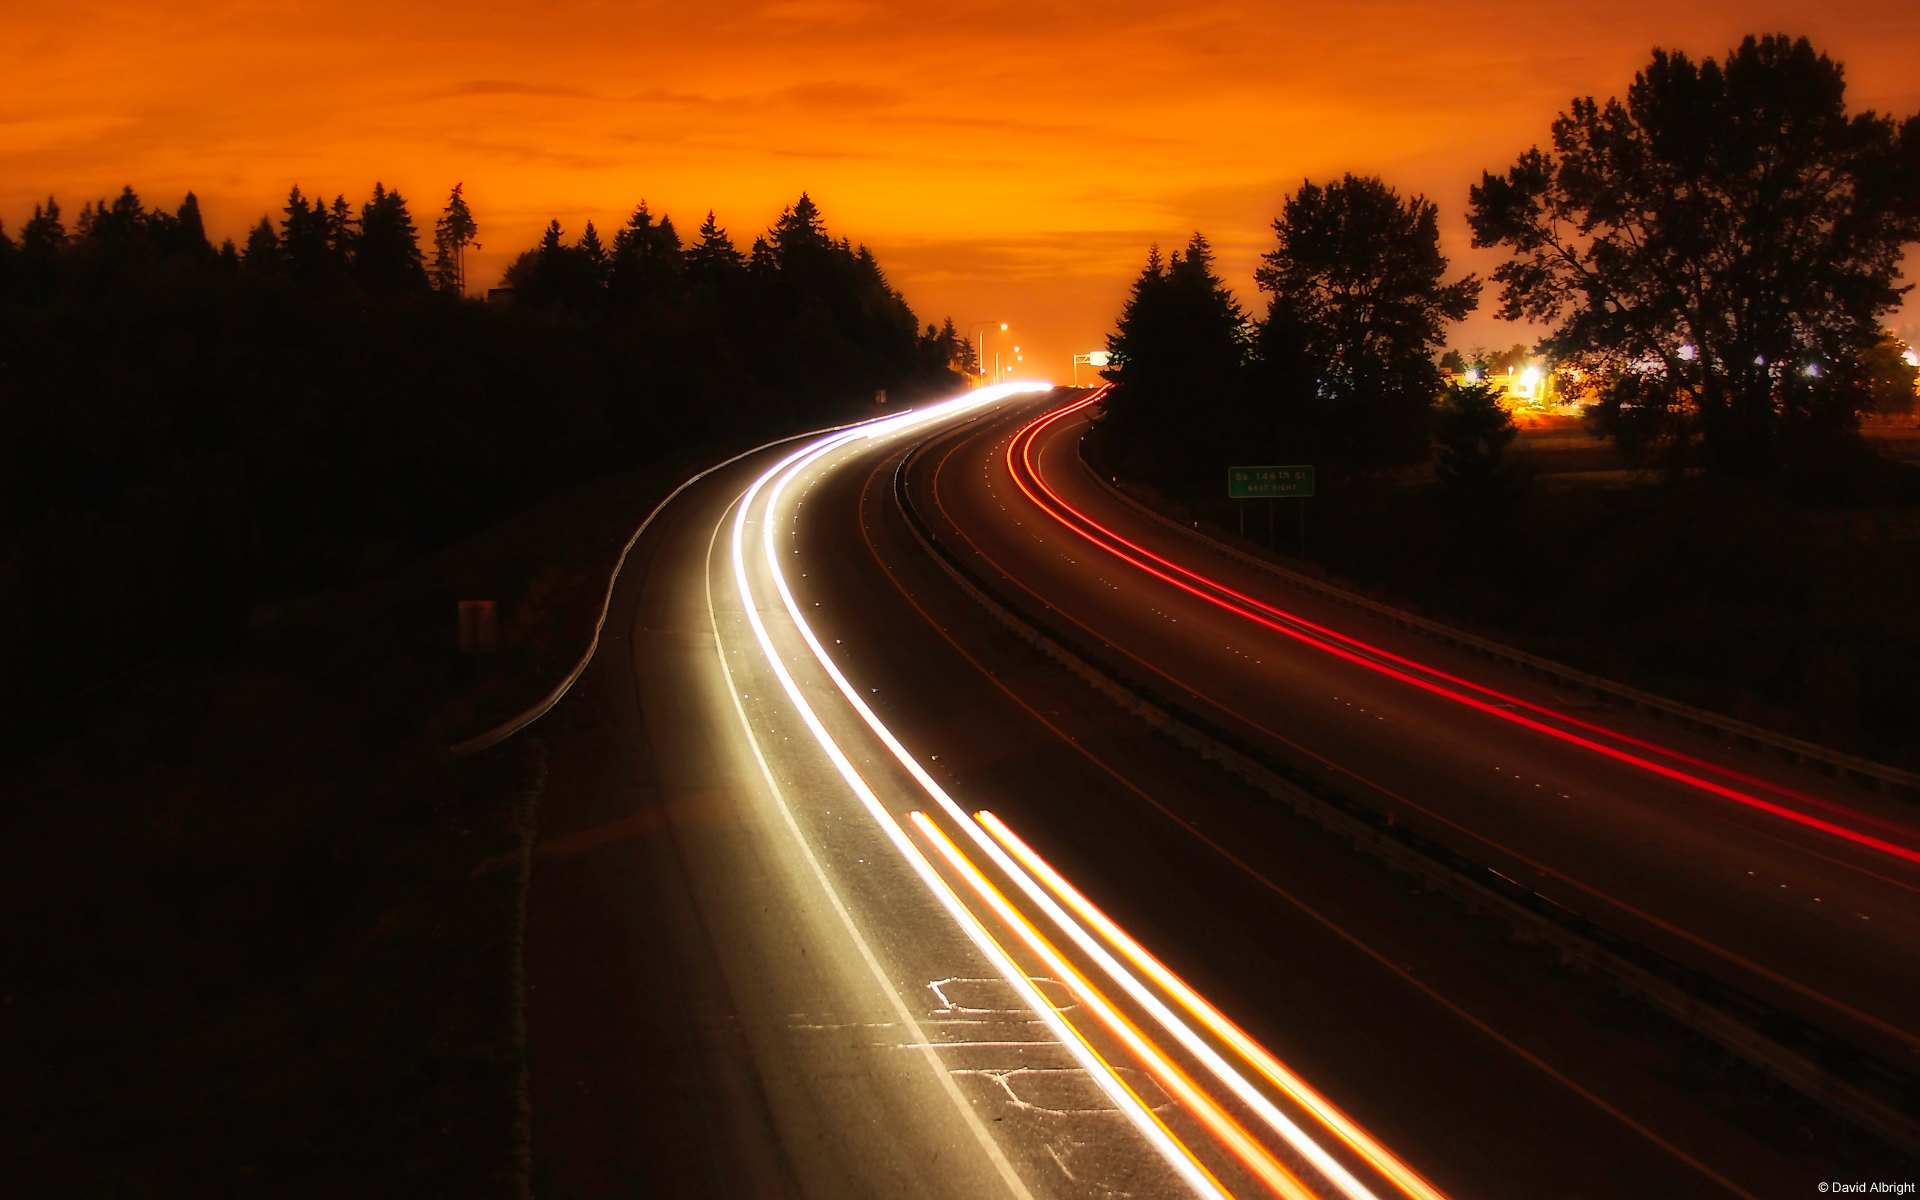 Highway at Sunset by David Albright